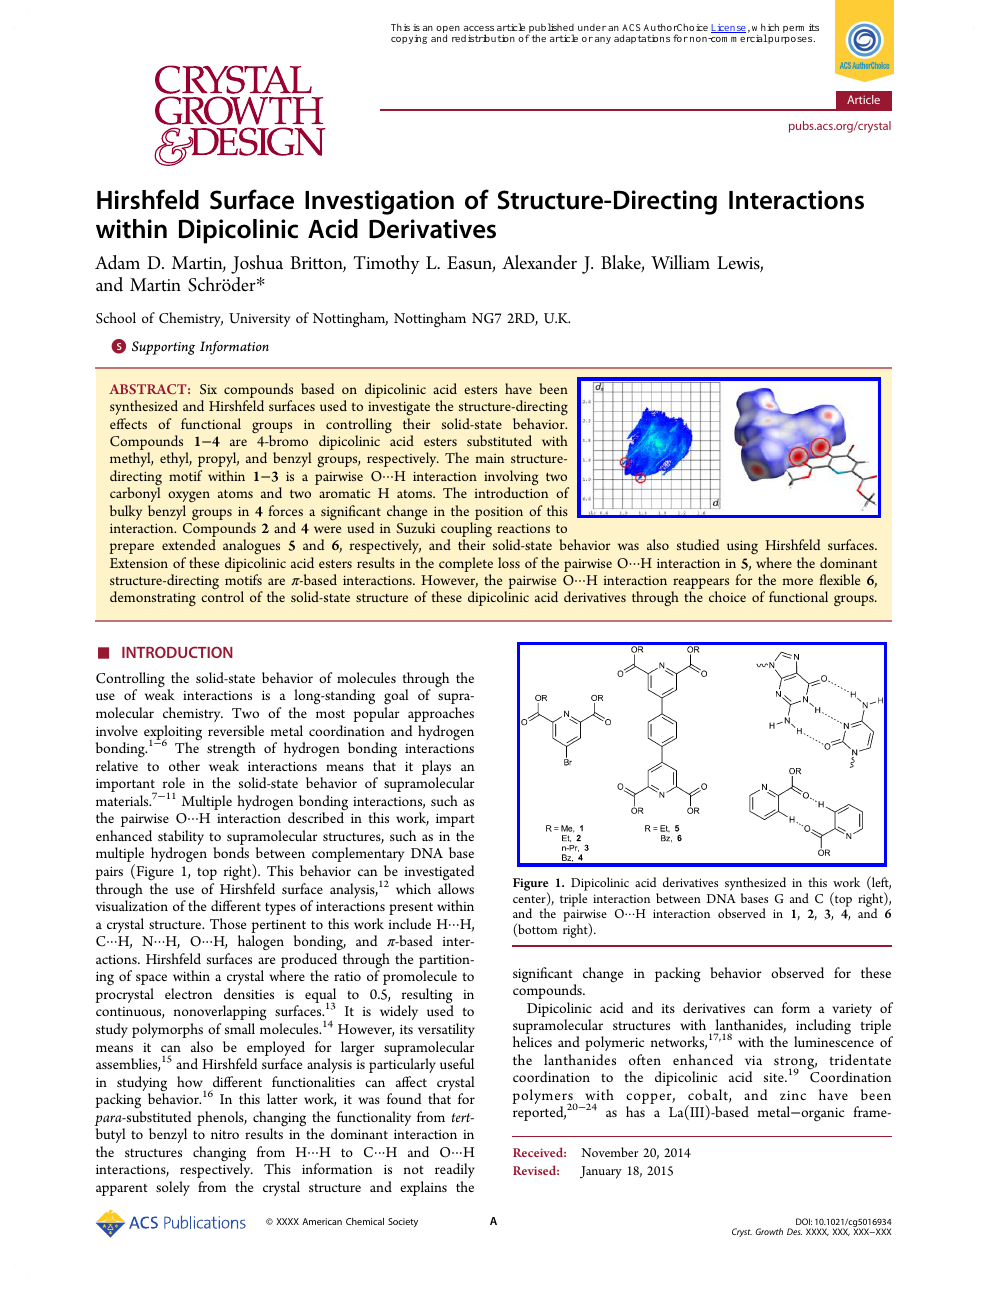 Hirshfeld Surface Investigation Of Structure Directing Interactions Within Dipicolinic Acid Derivatives Topic Of Research Paper In Chemical Sciences Download Scholarly Article Pdf And Read For Free On Cyberleninka Open Science Hub